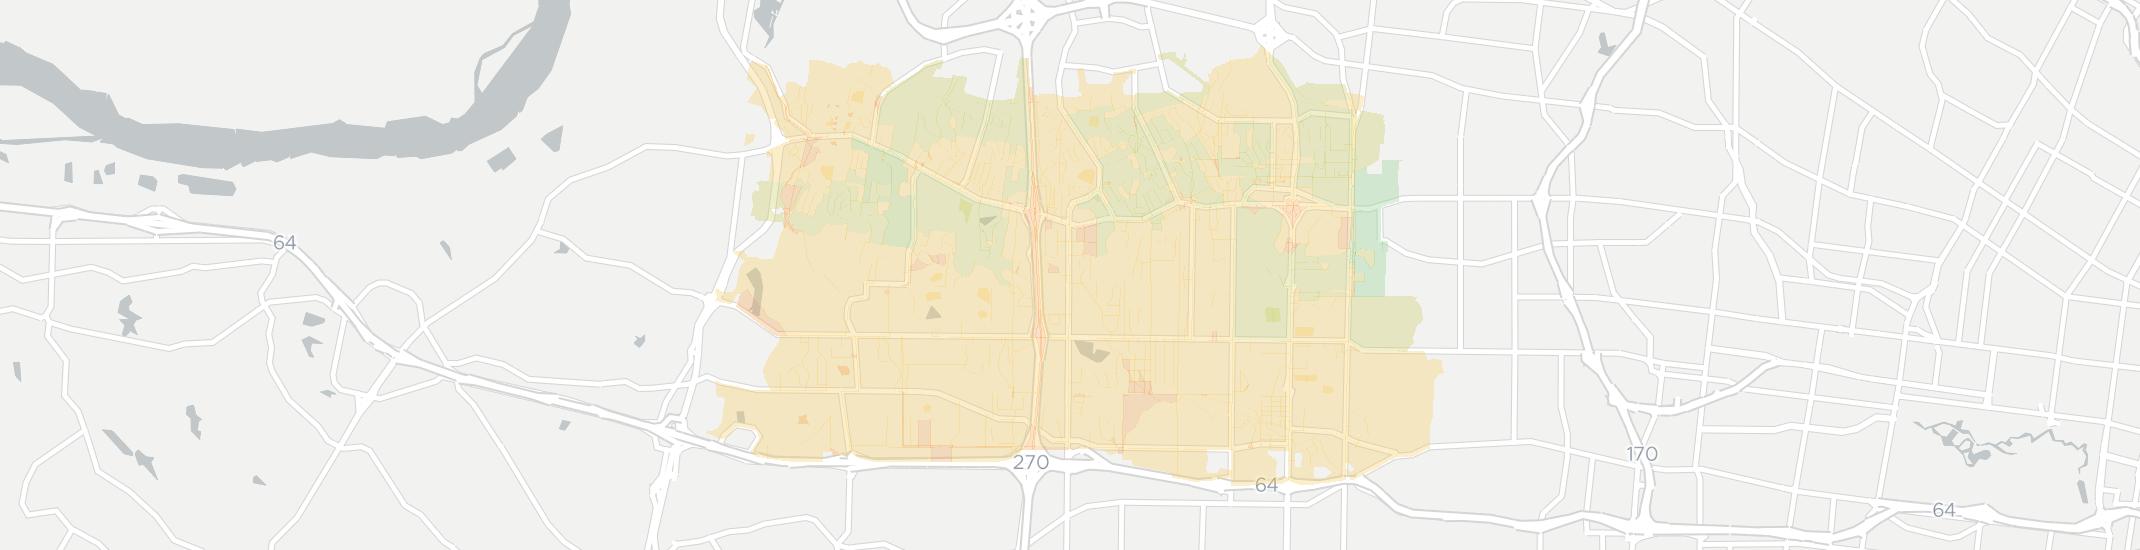 Creve Coeur Internet Competition Map. Click for interactive map